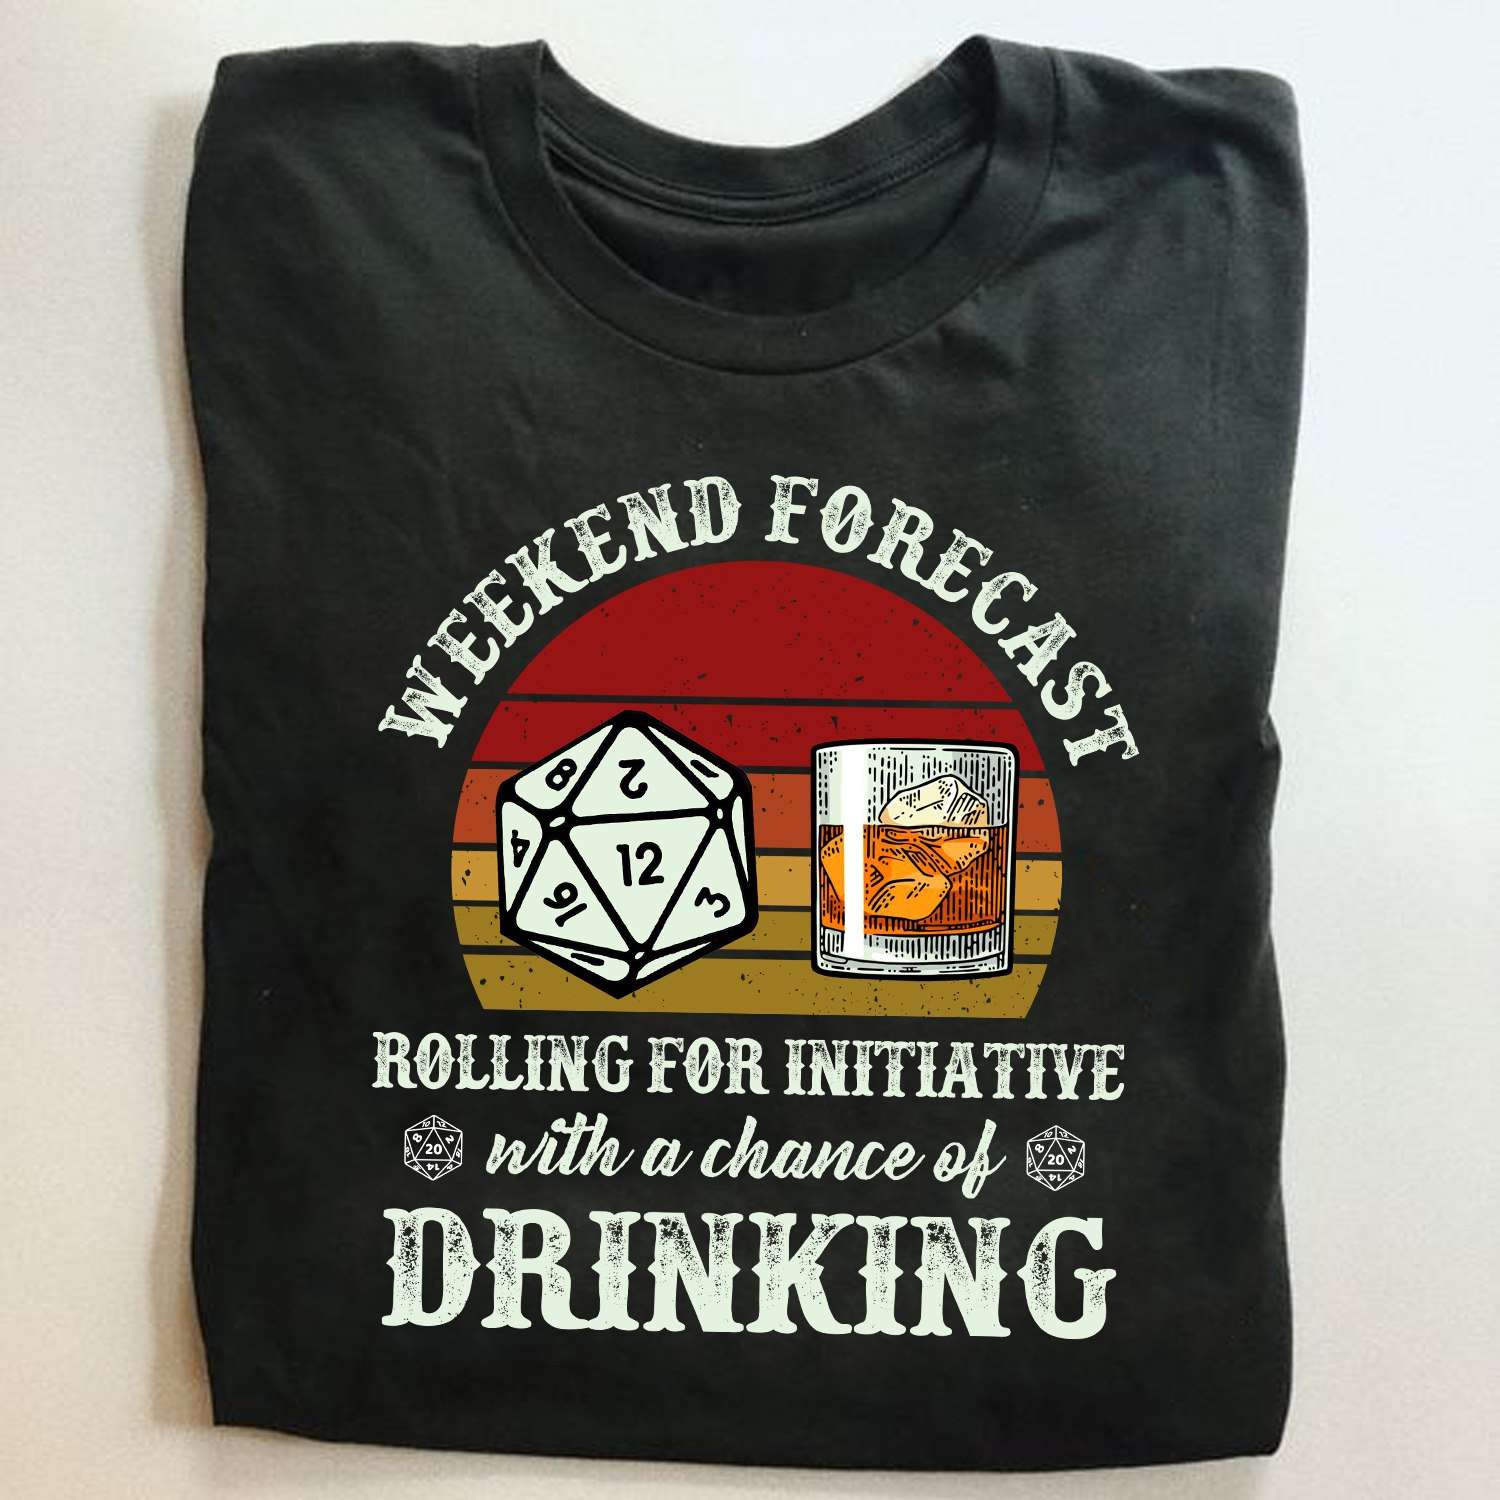 Weekend forecast rolling for initiative with a chance of drinking - D&d game